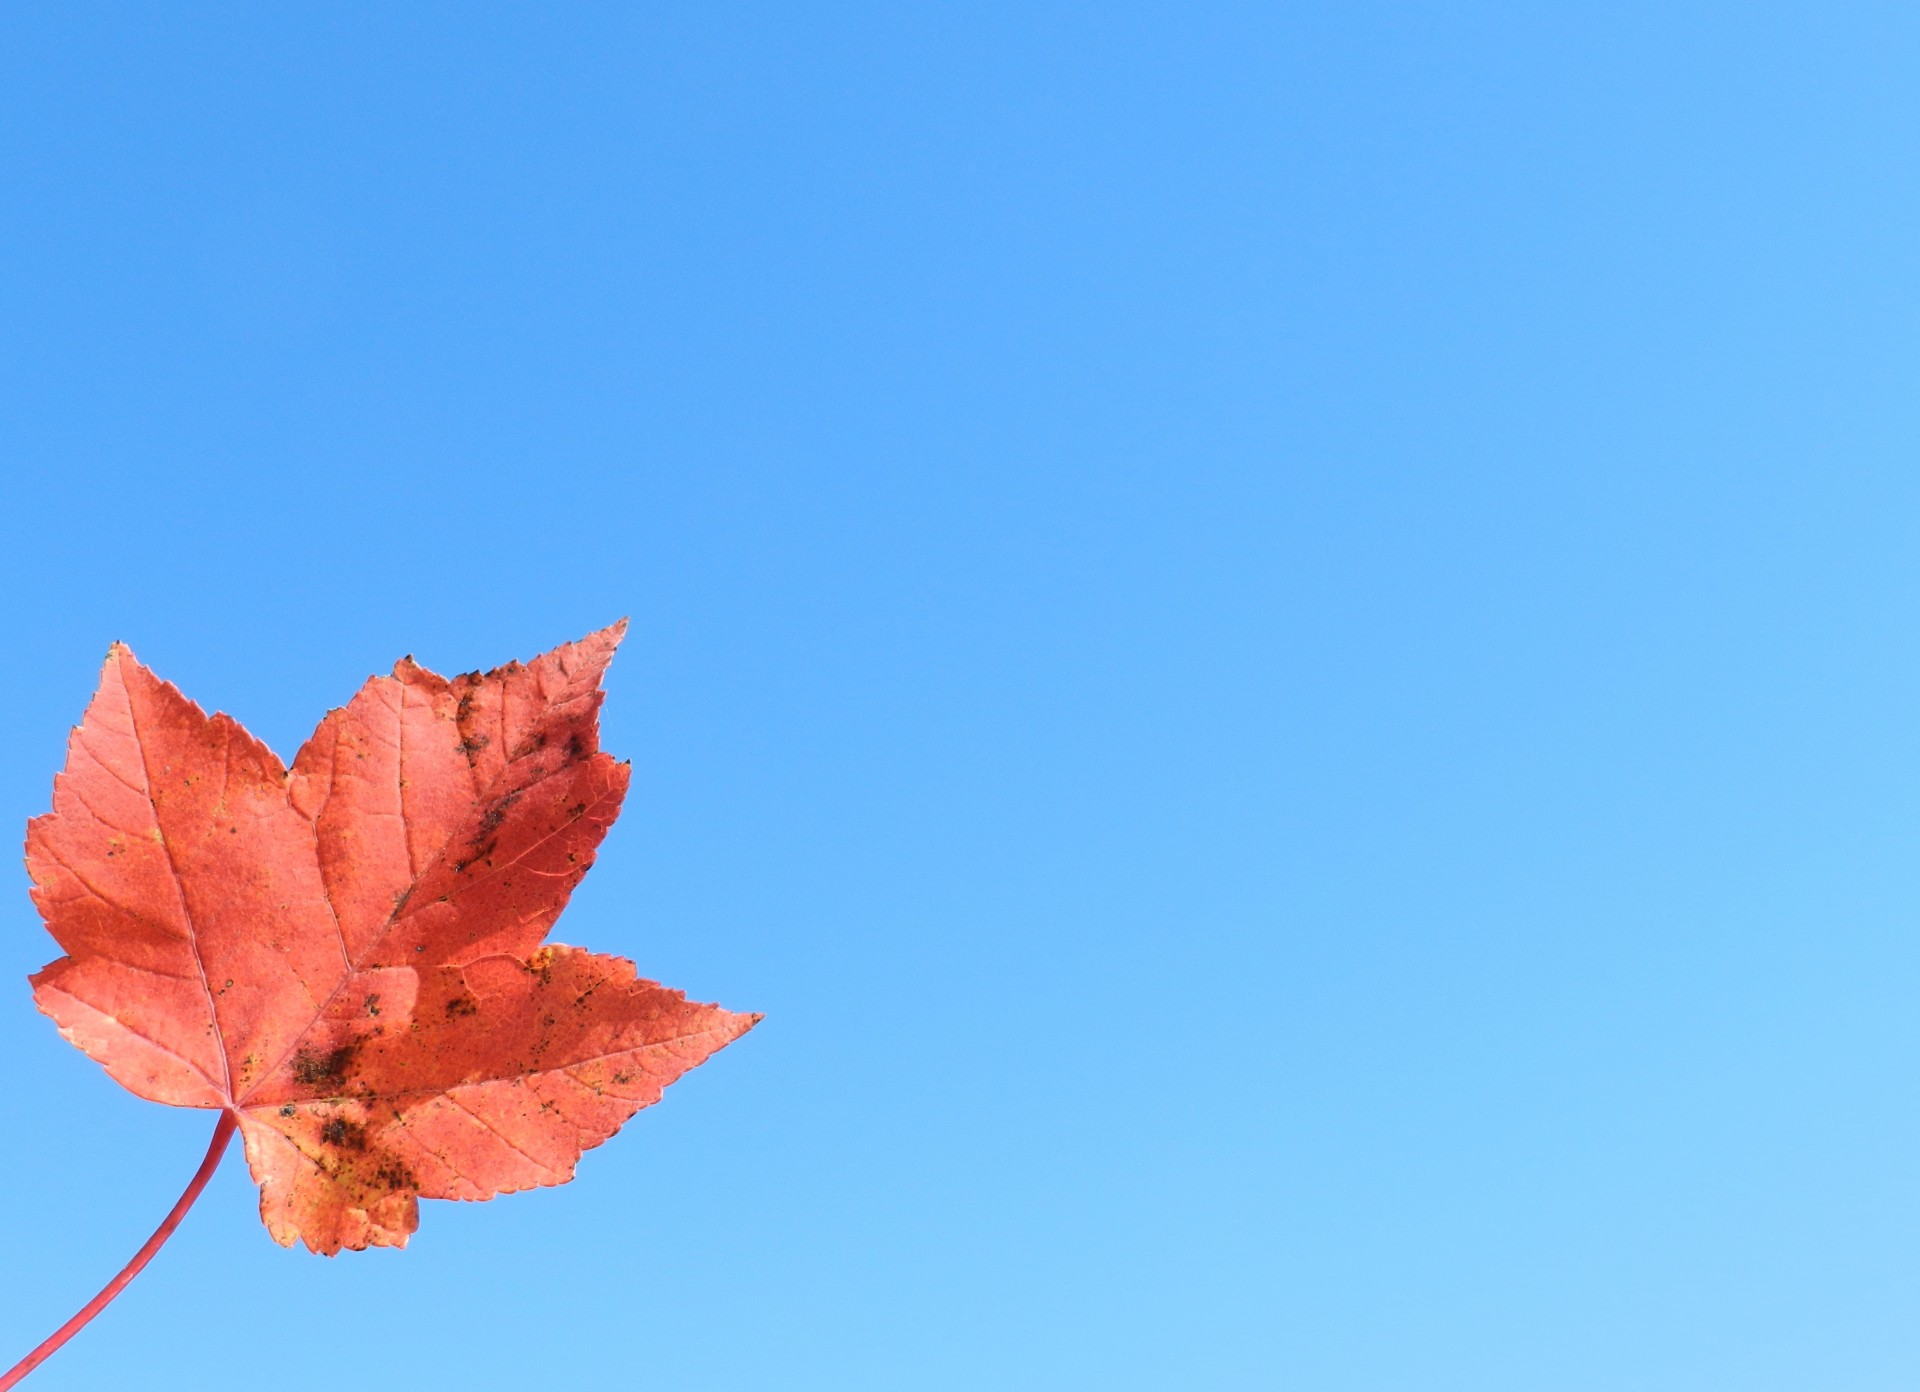 Red Maple Leaf